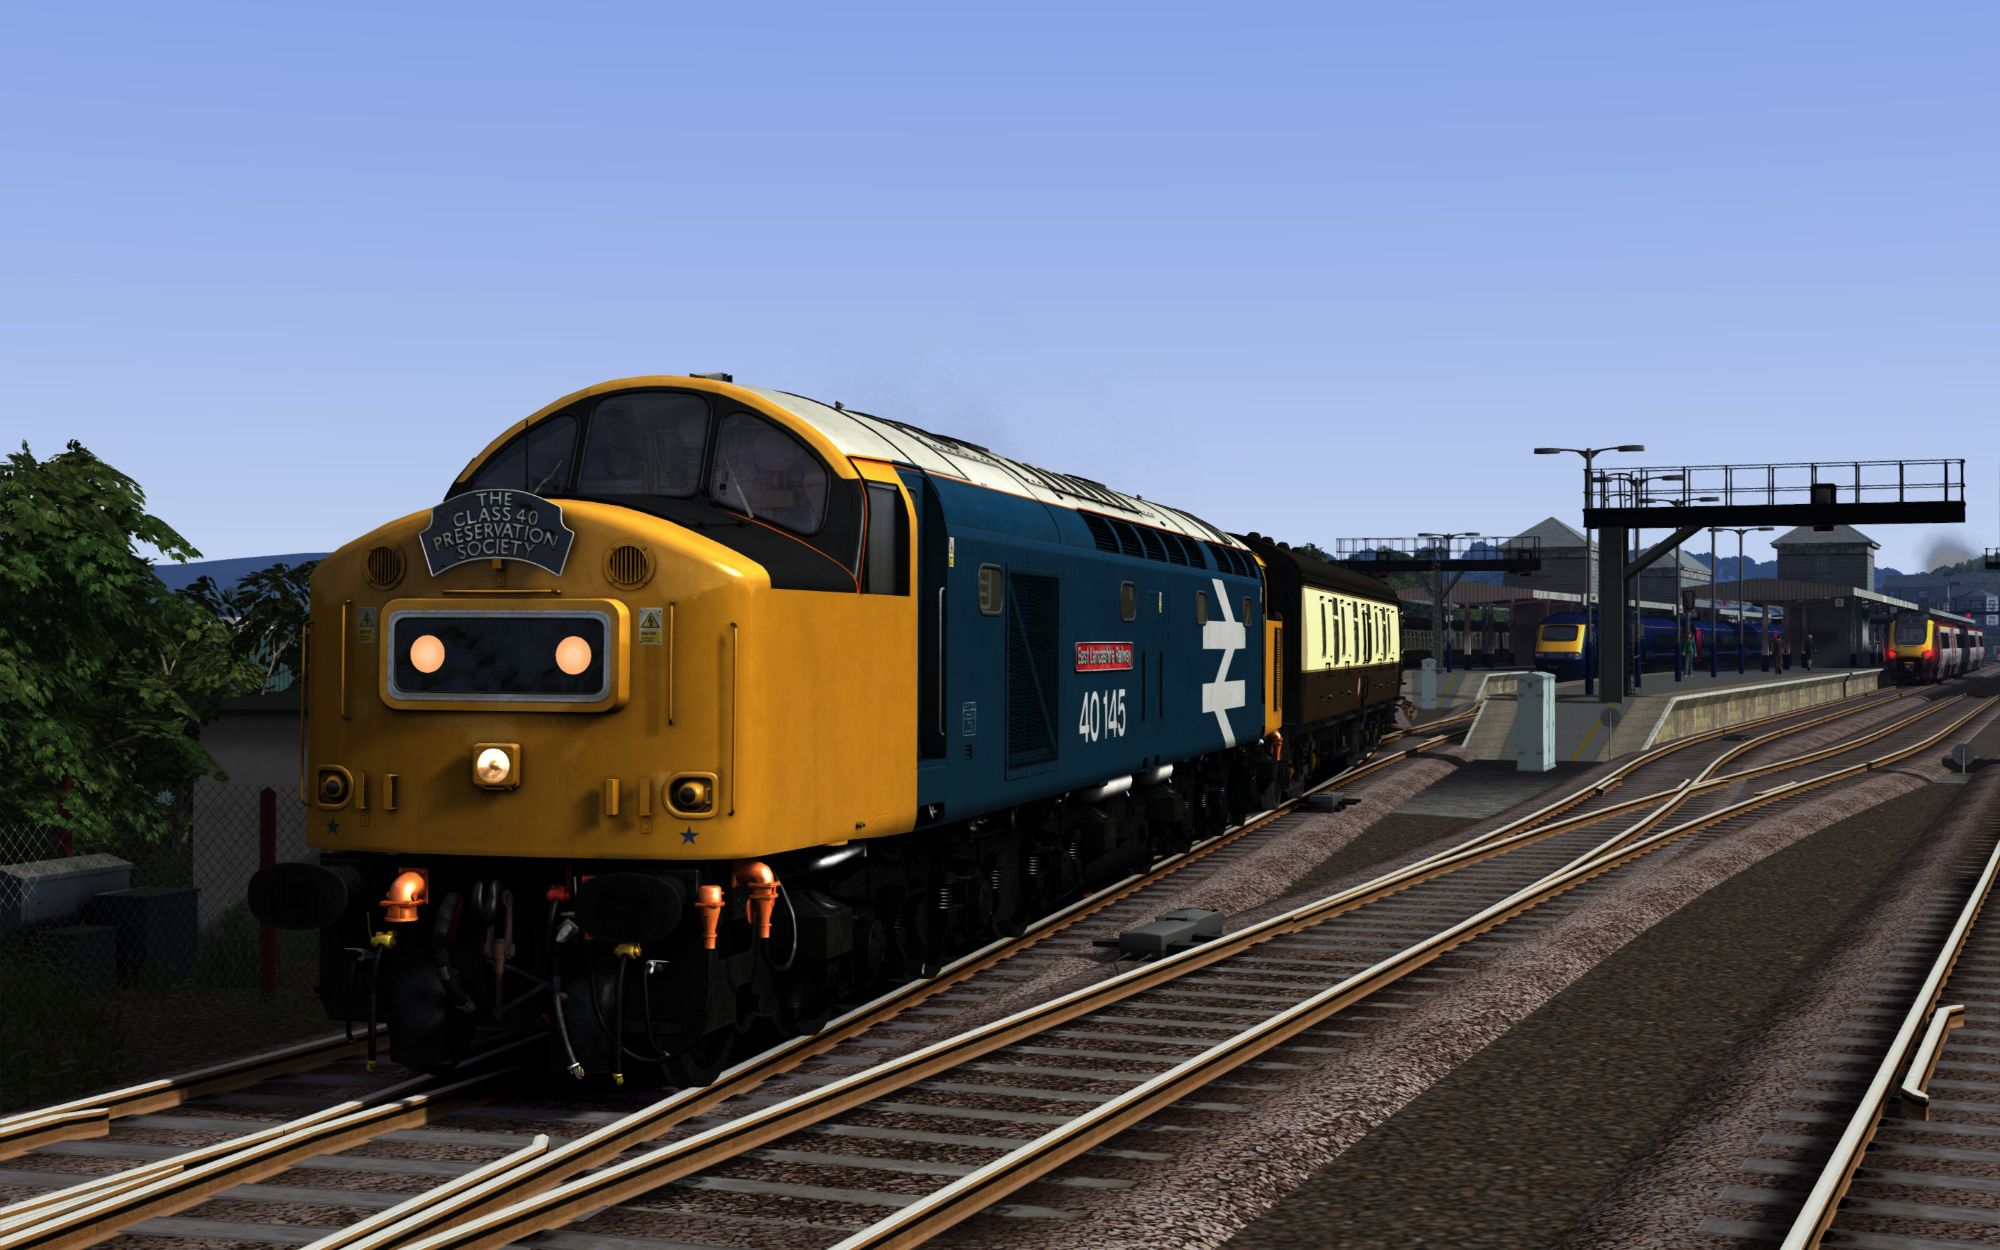 Image showing screenshot of the 1A77 - 0541 Penzance to London PaddiImage showing screenshot of the 1Z37 - 0547 Portsmouth Harbour to Penzance scenariongton scenario